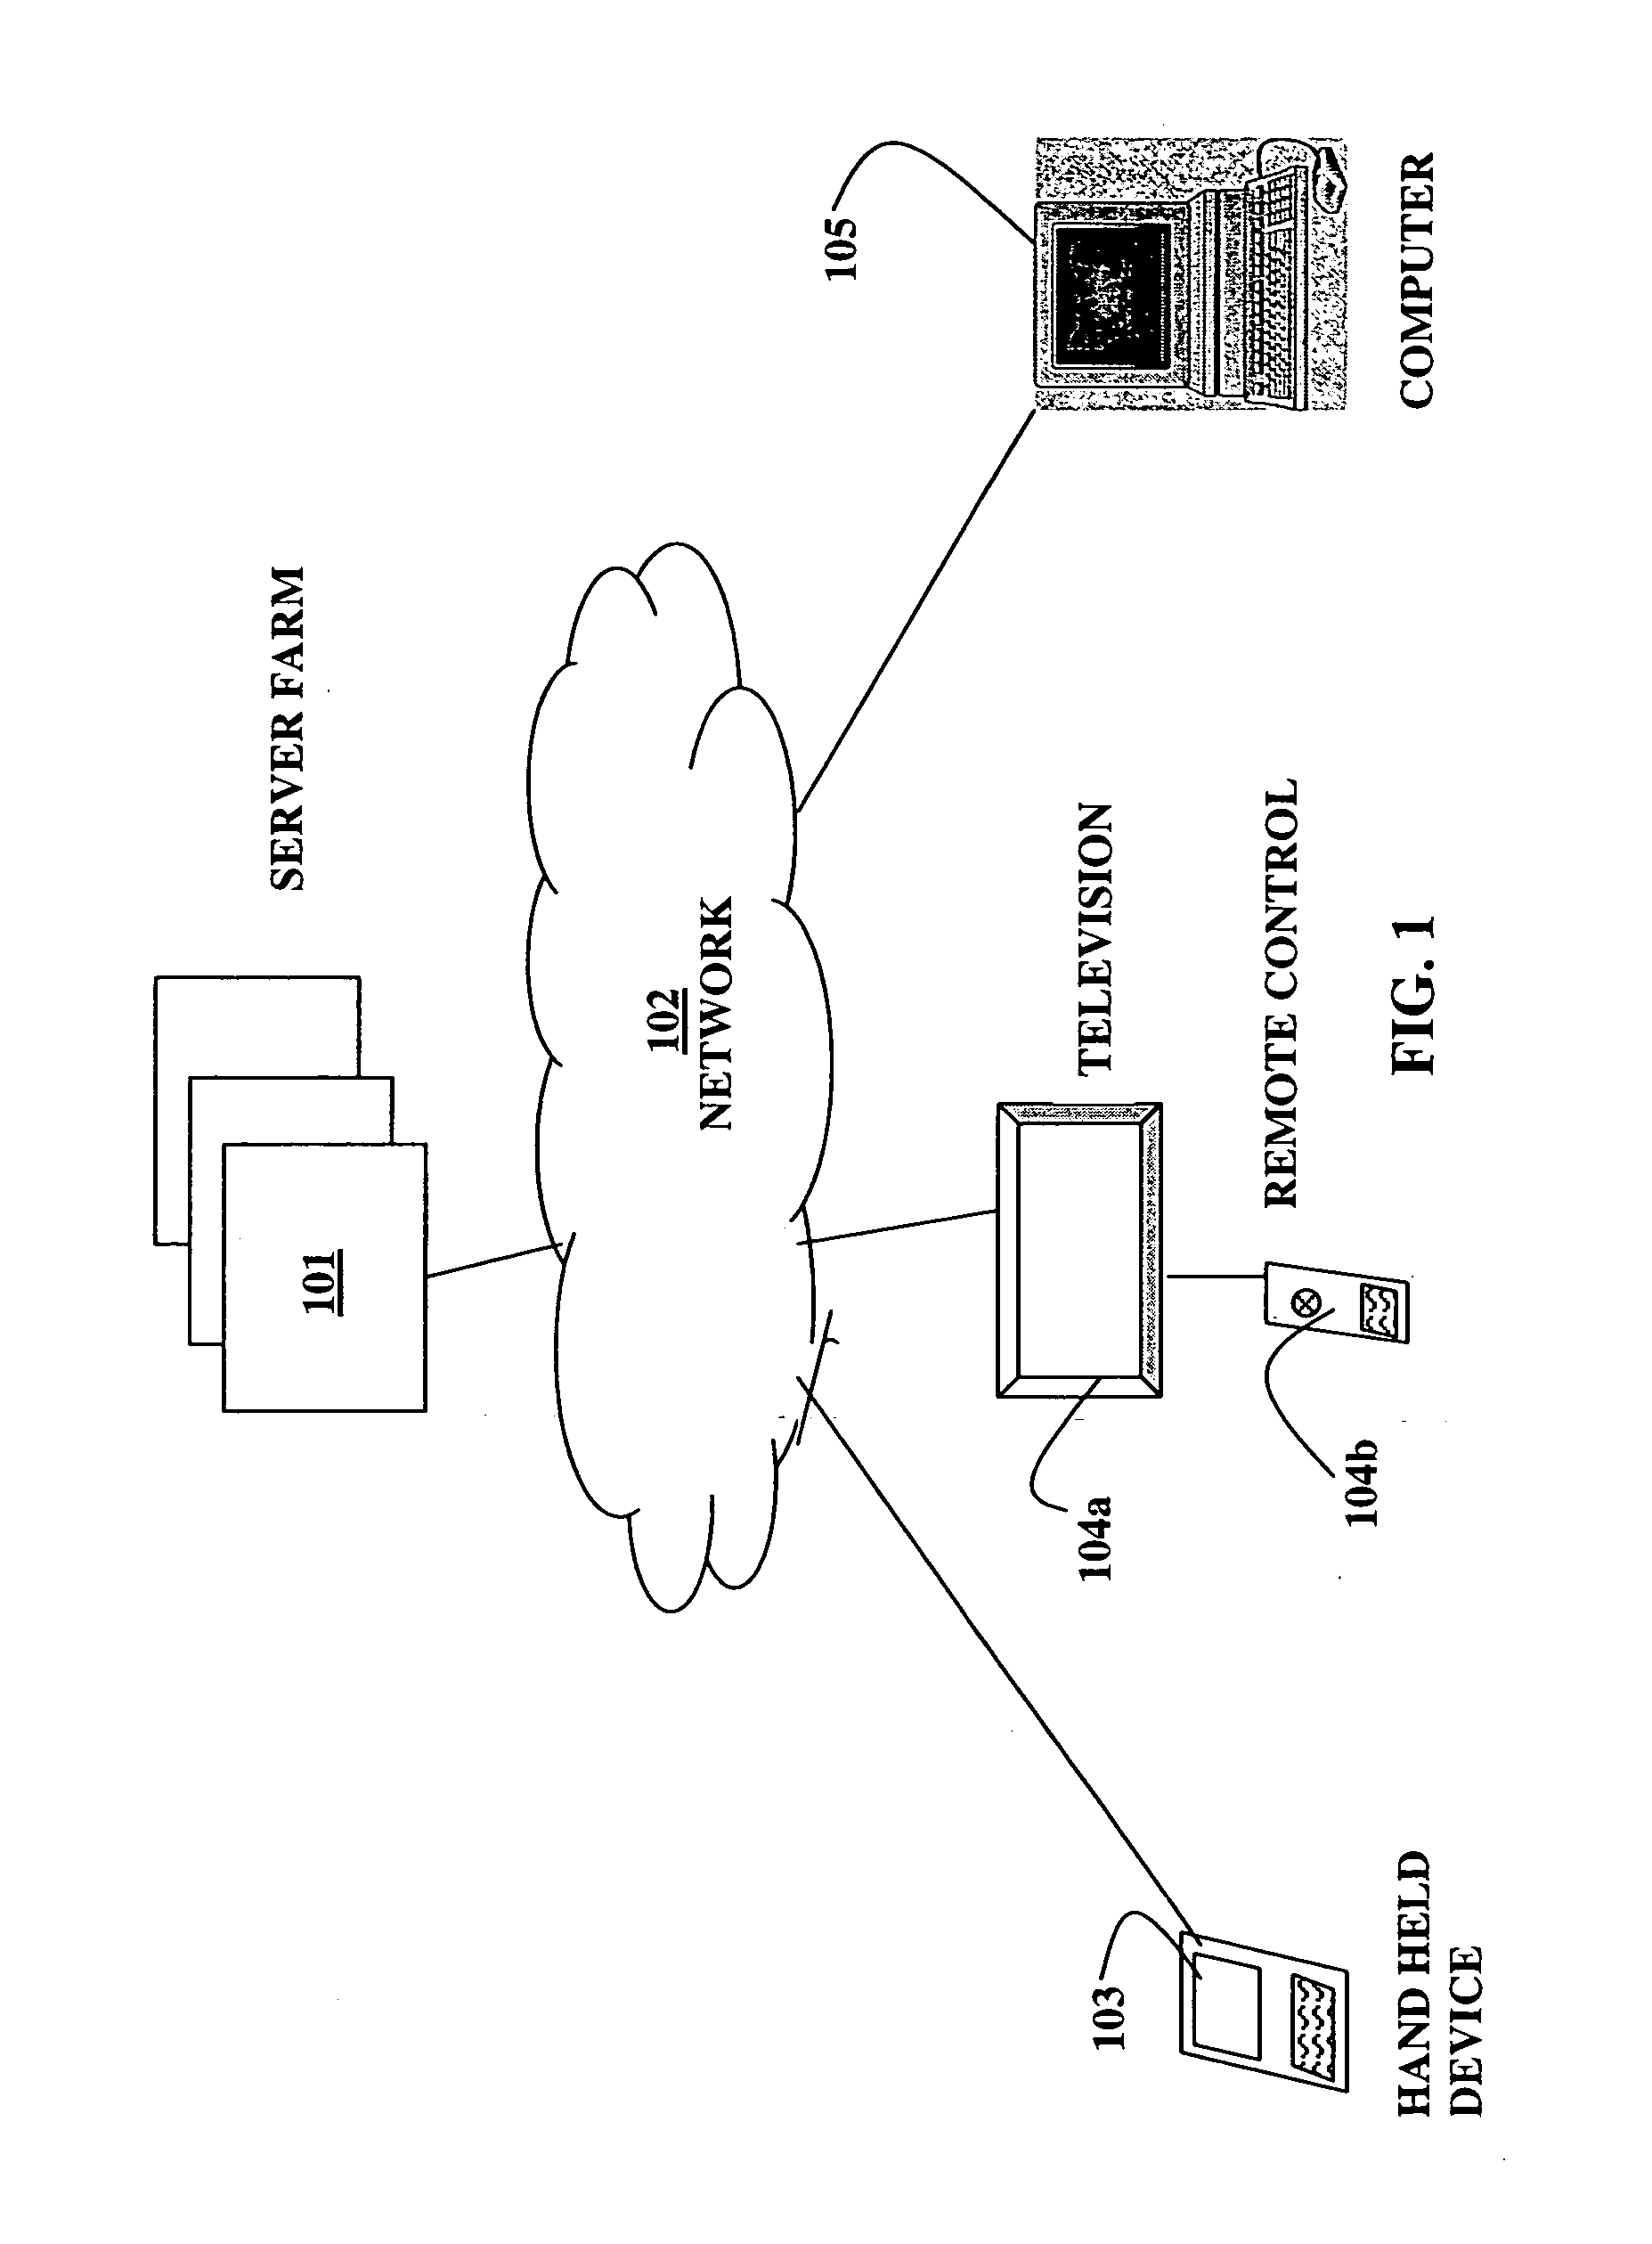 Method and system for performing searches for television content using reduced text input